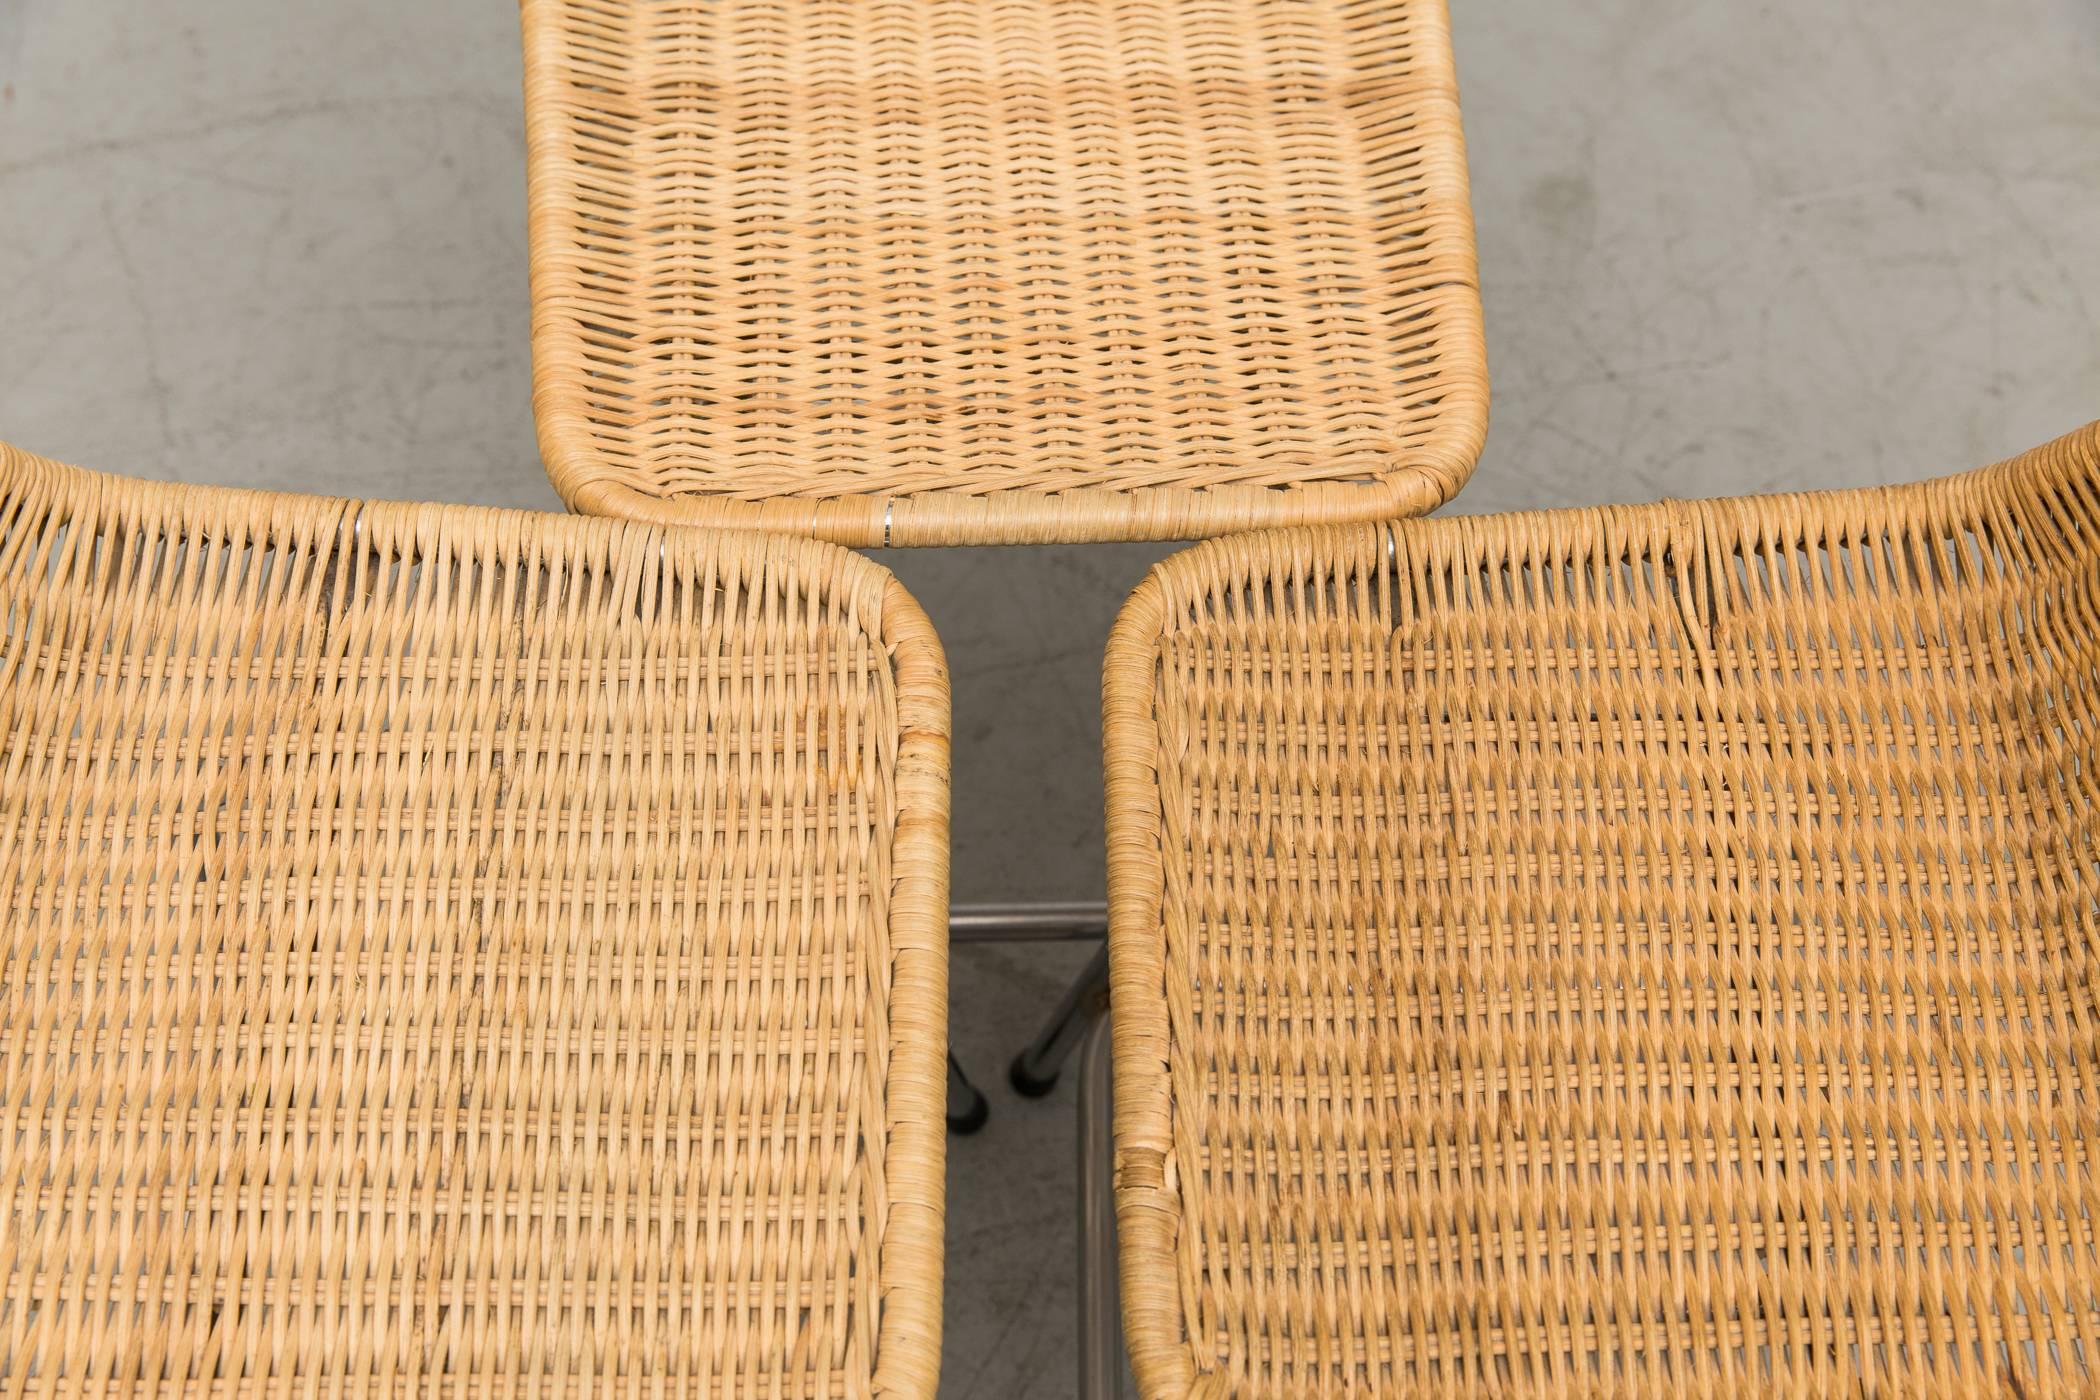 Set of three table height angle backed wicker. Slight variation in coloring. These were once tall bar stools which have since been shortened to table or low counter height. All original condition with visible signs of wear. Chrome in very original